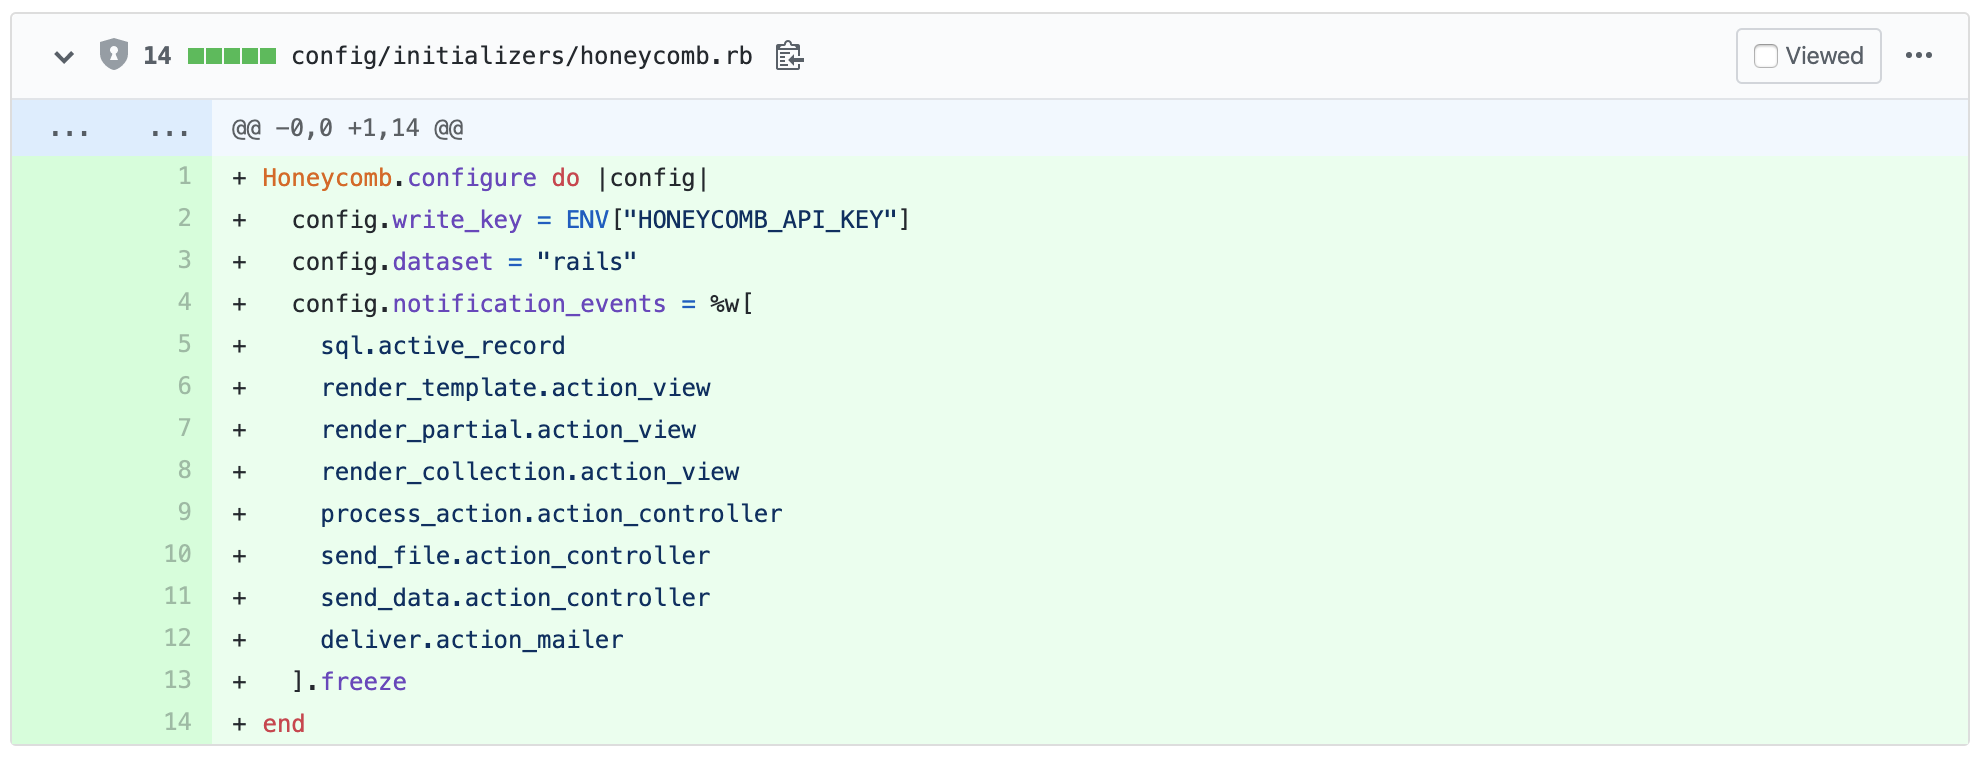 GitHub PR diff showing a new file added with the filename config/initializers/honeycomb.rb. The file contents are Rails configuration settings.